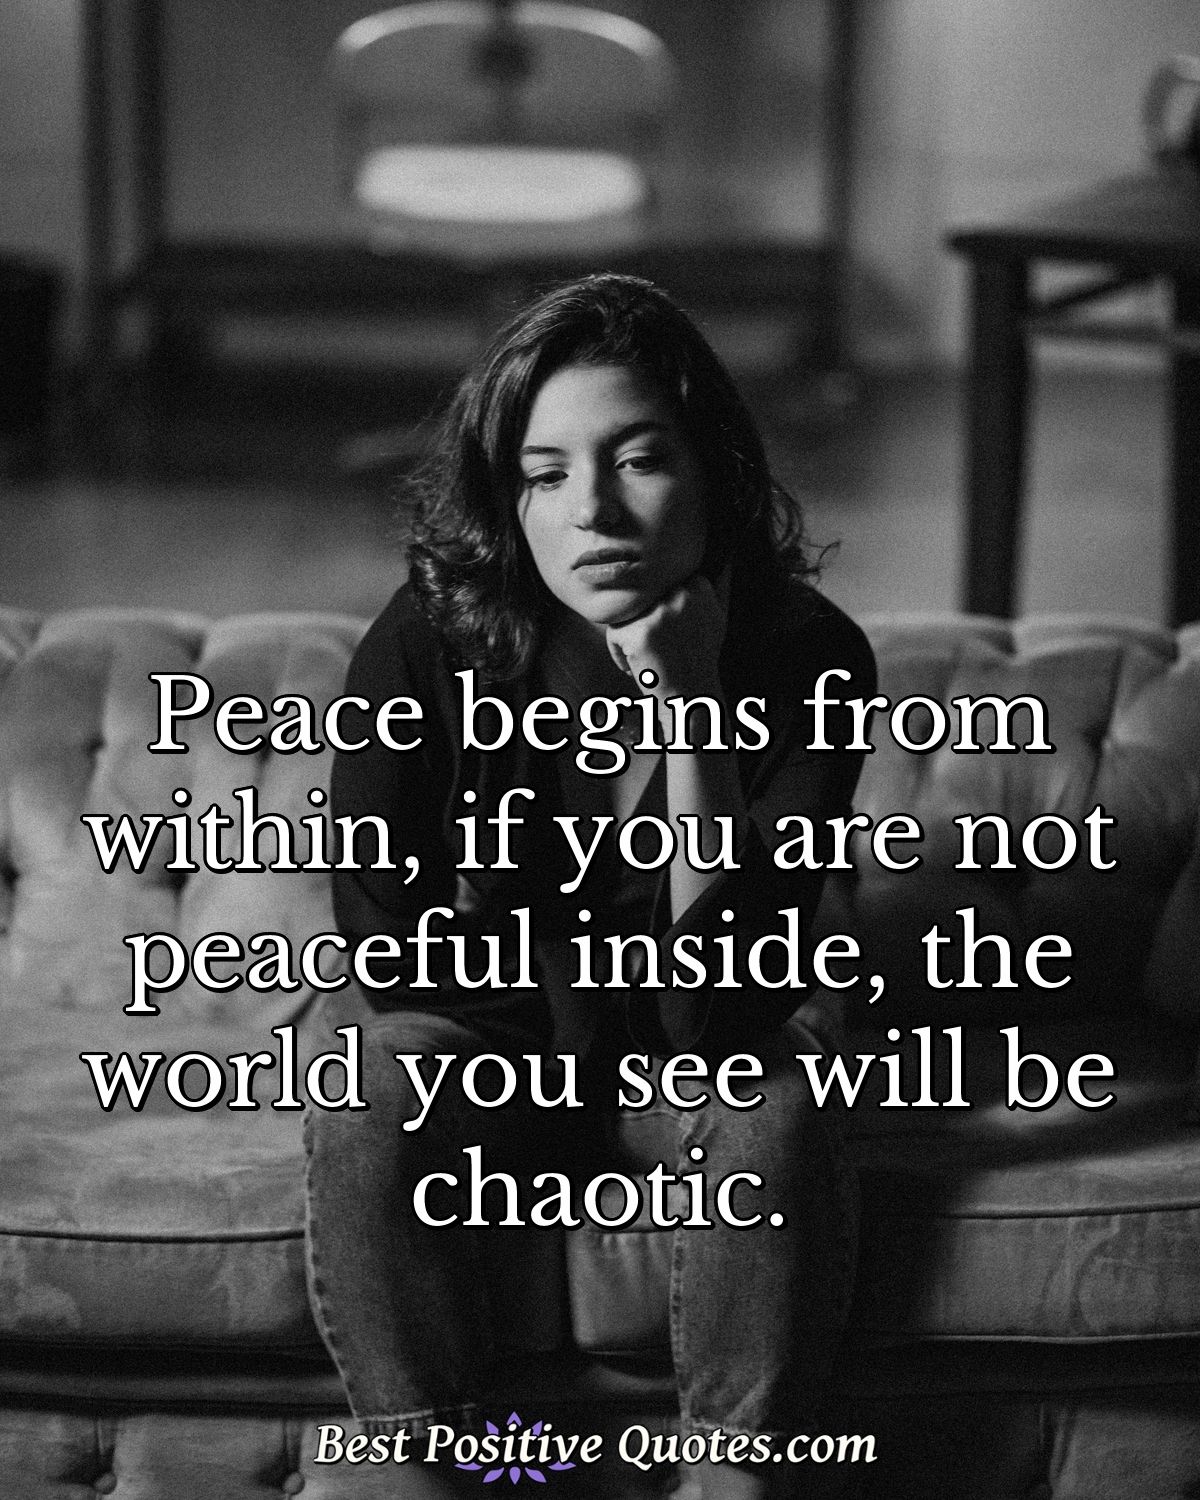 Peace begins from within, if you are not peaceful inside, the world you see will be chaotic. - Anonymous